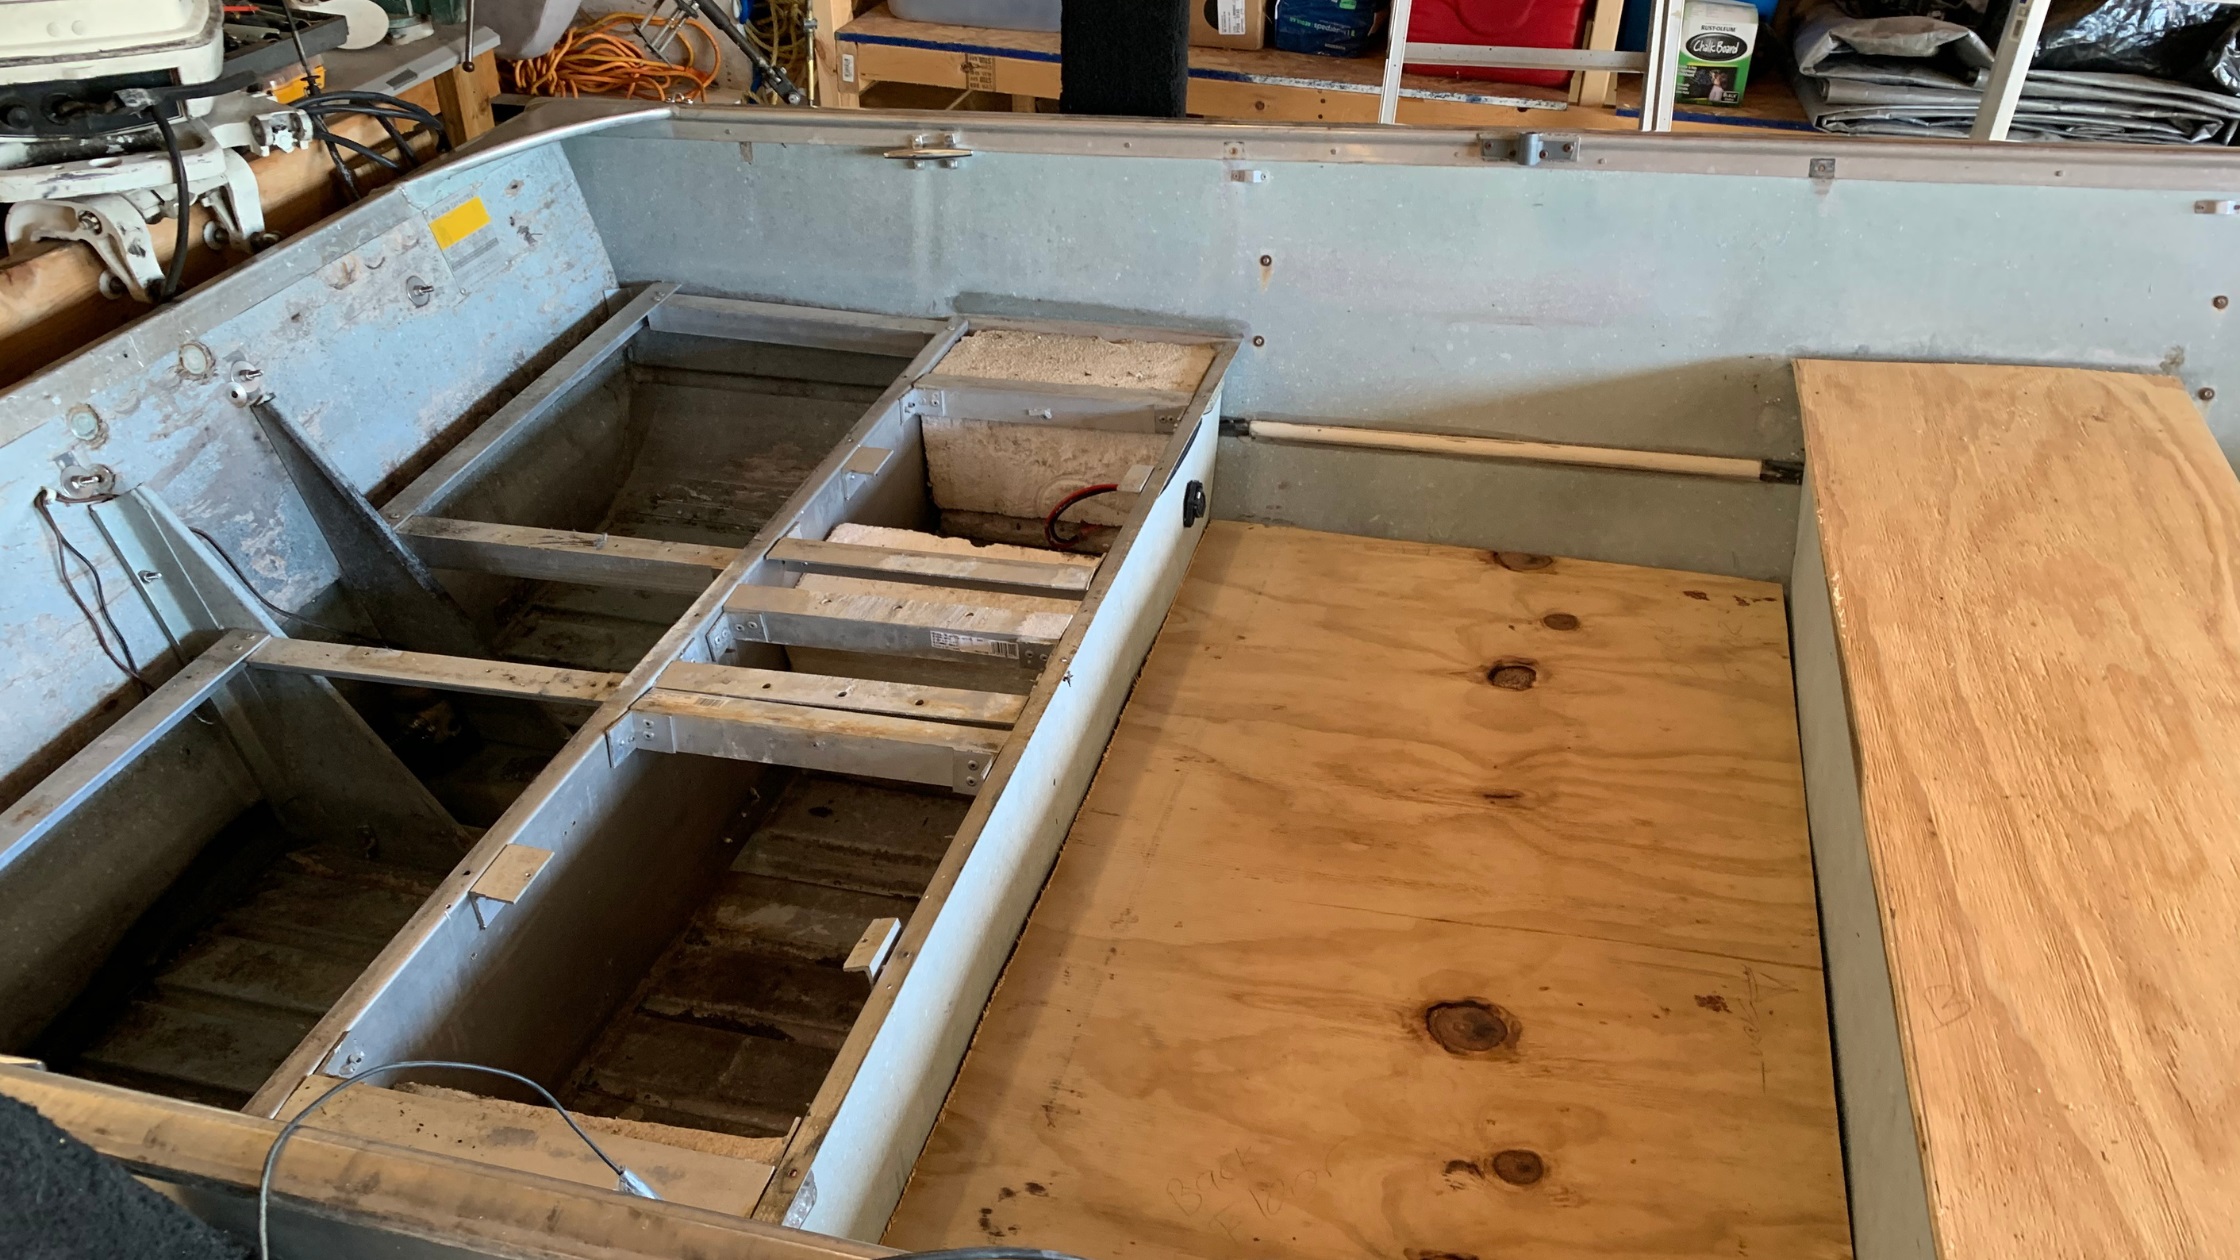 How to Build a Boat Seat Box